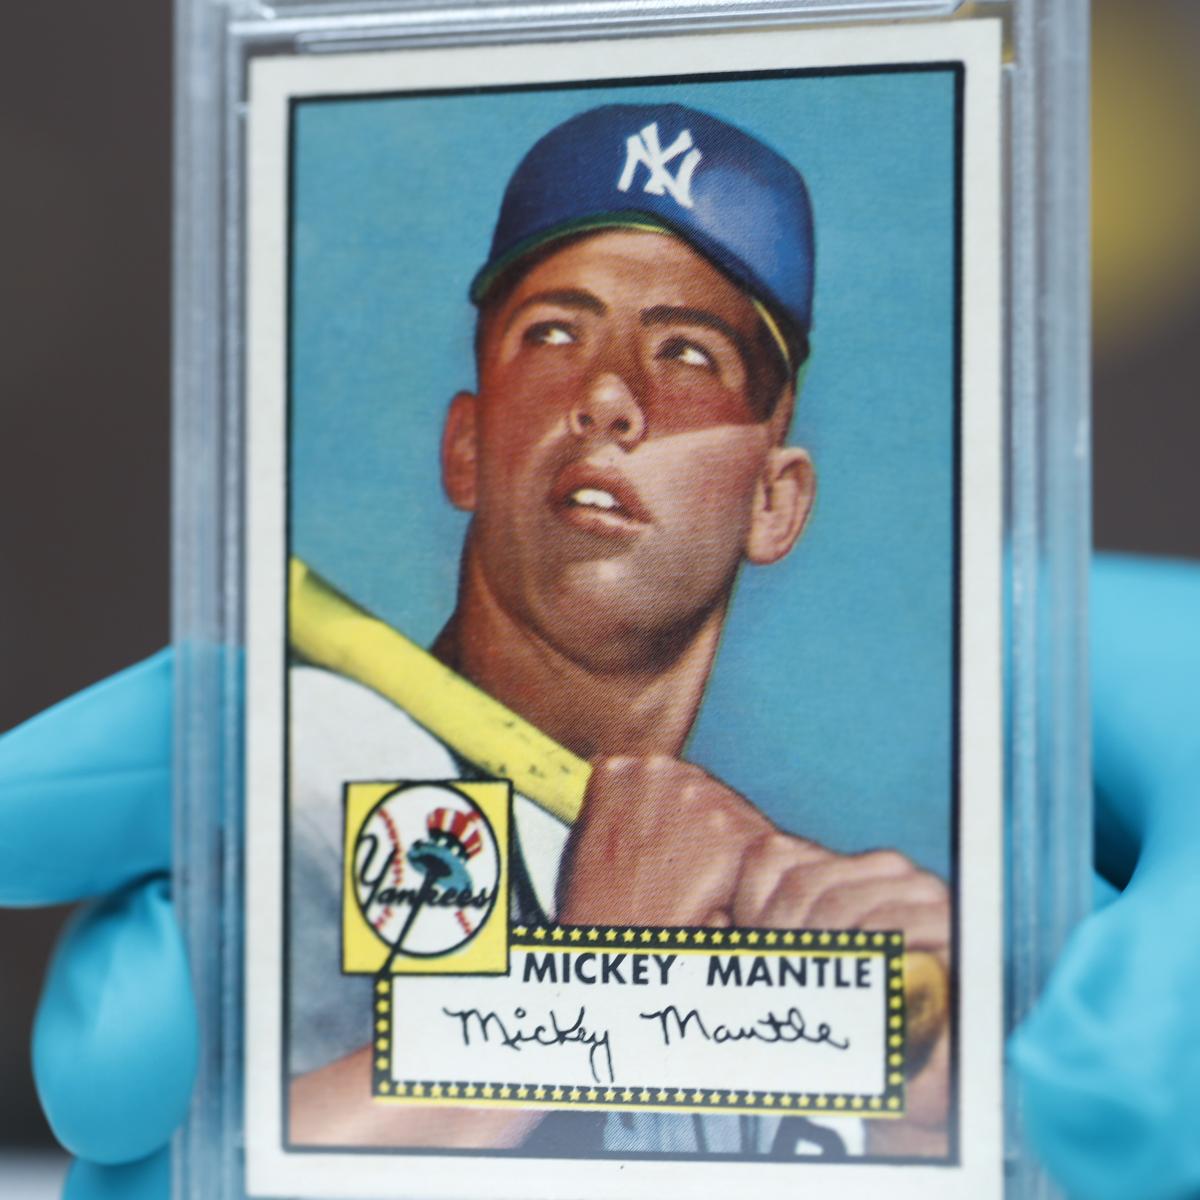 Mickey Mantle PSA 1952 Topps Card Sells for World File $1,605,150 at Public sale